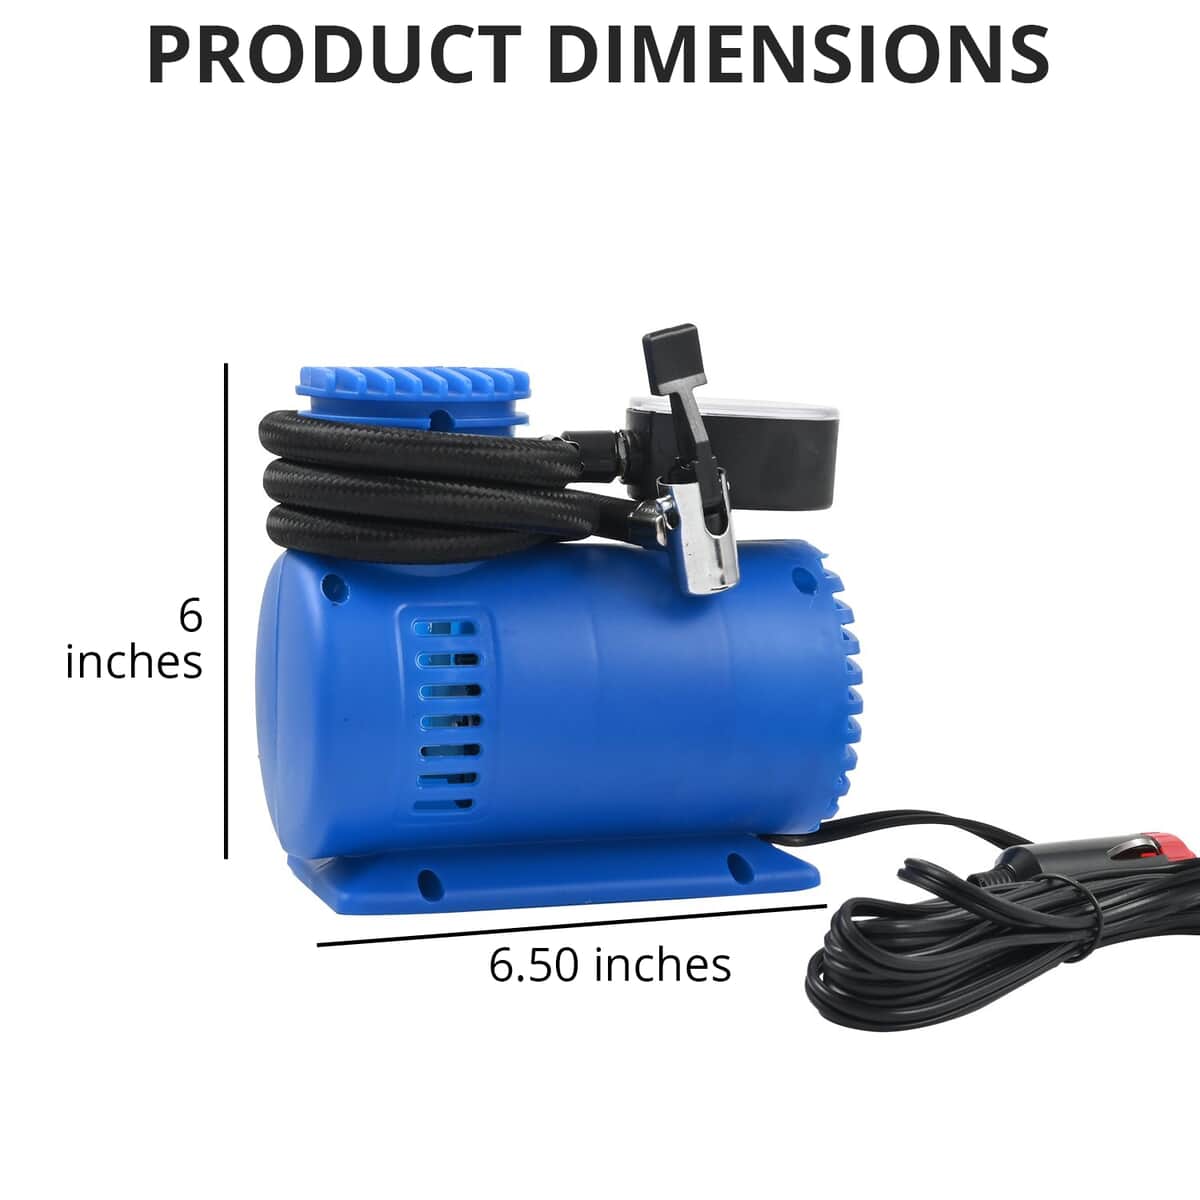 AUTO EFFECTS Blue Portable Mini Air Compressor for Tire Inflation, 12Volt DC Powered, Built-in Pressure Gauge, Inflates Automobile tires, Bike tires image number 4